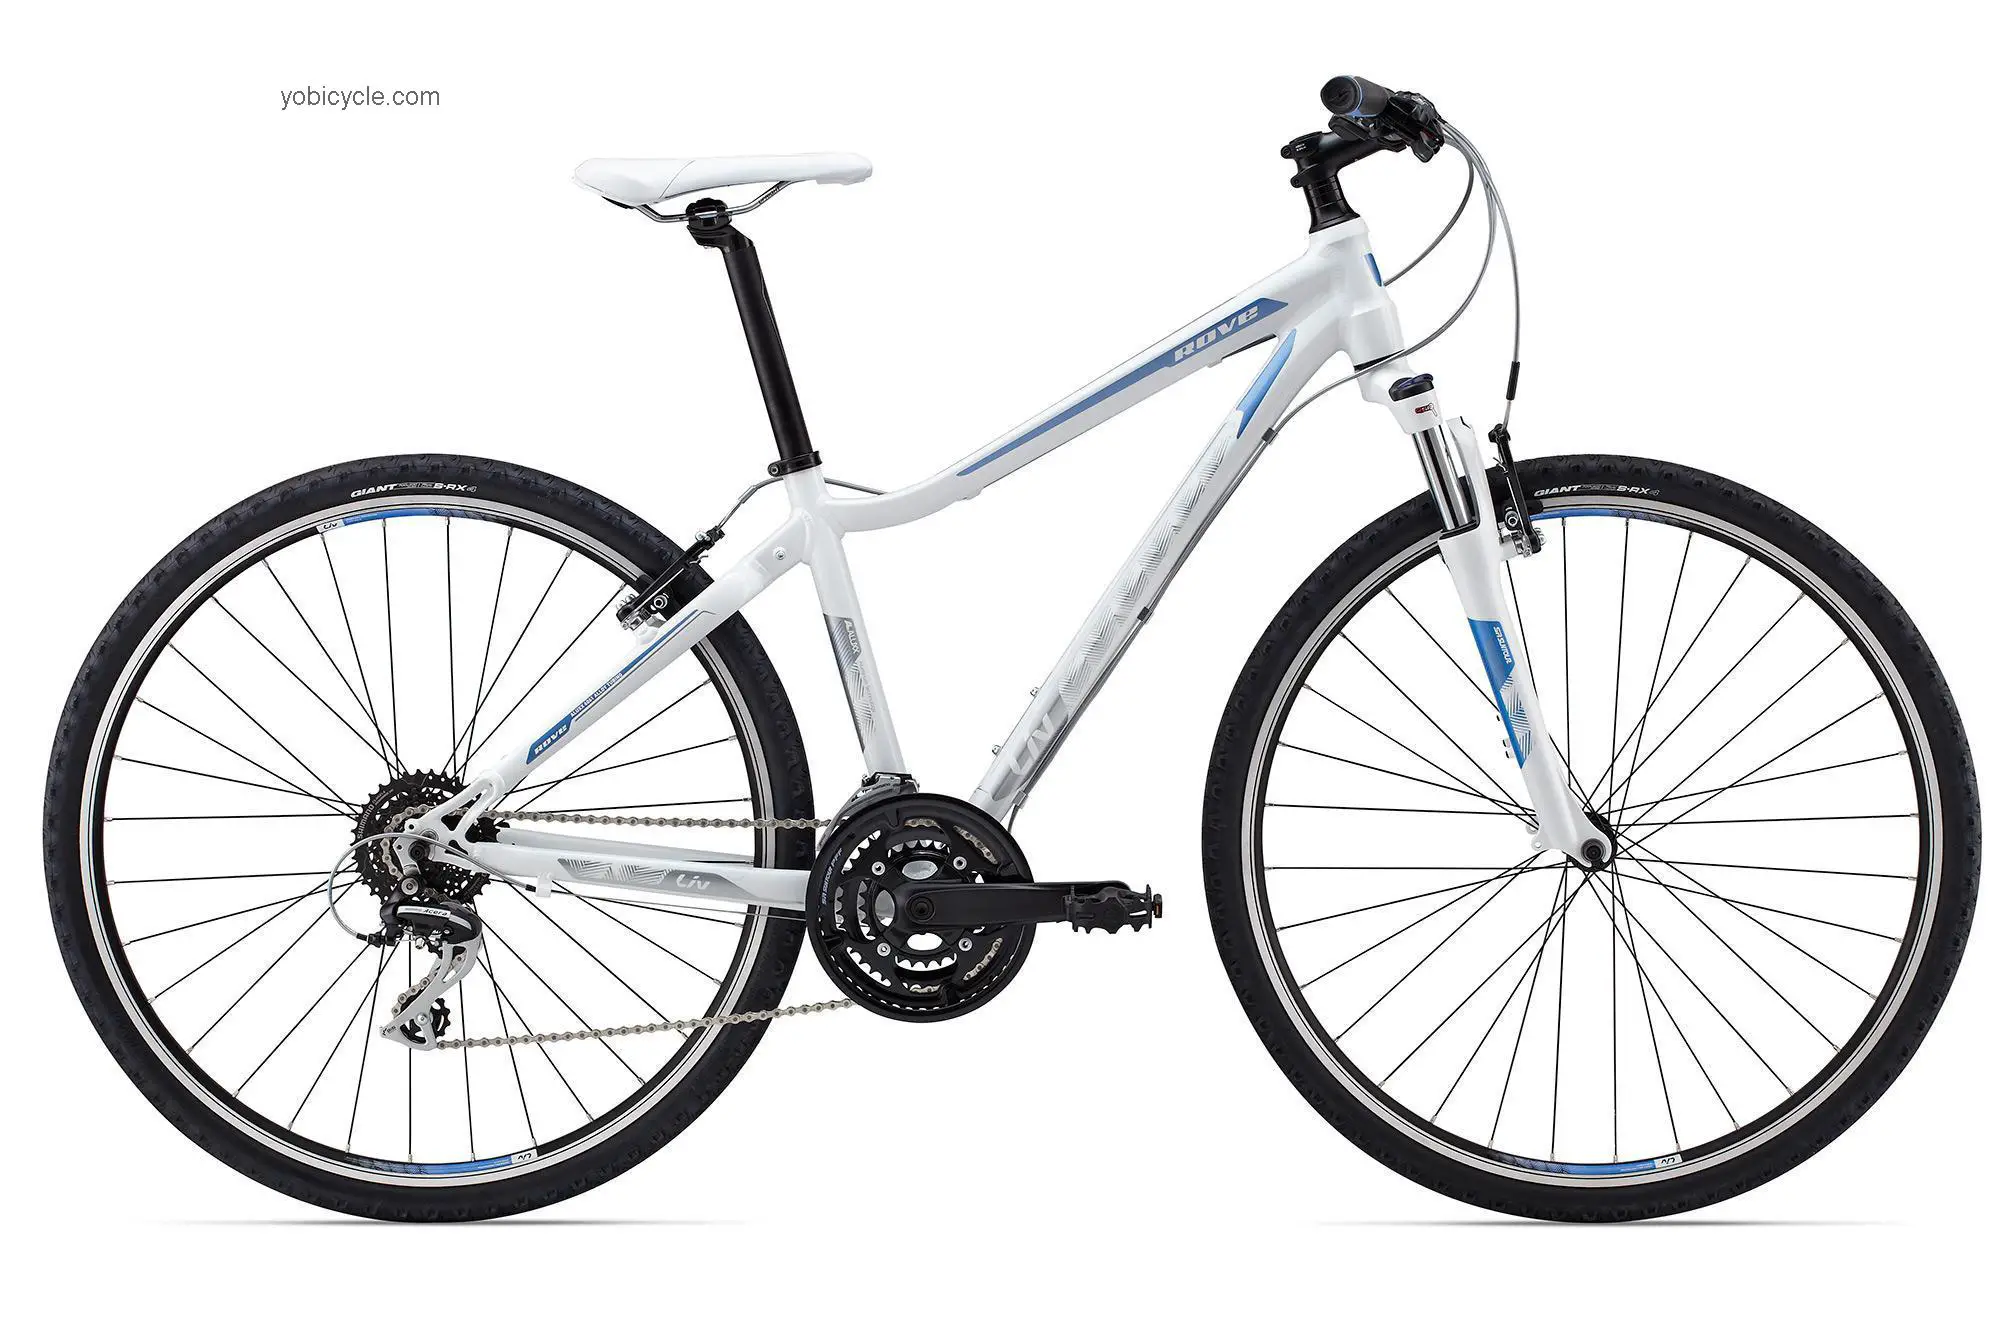 Giant Rove 3 2015 comparison online with competitors